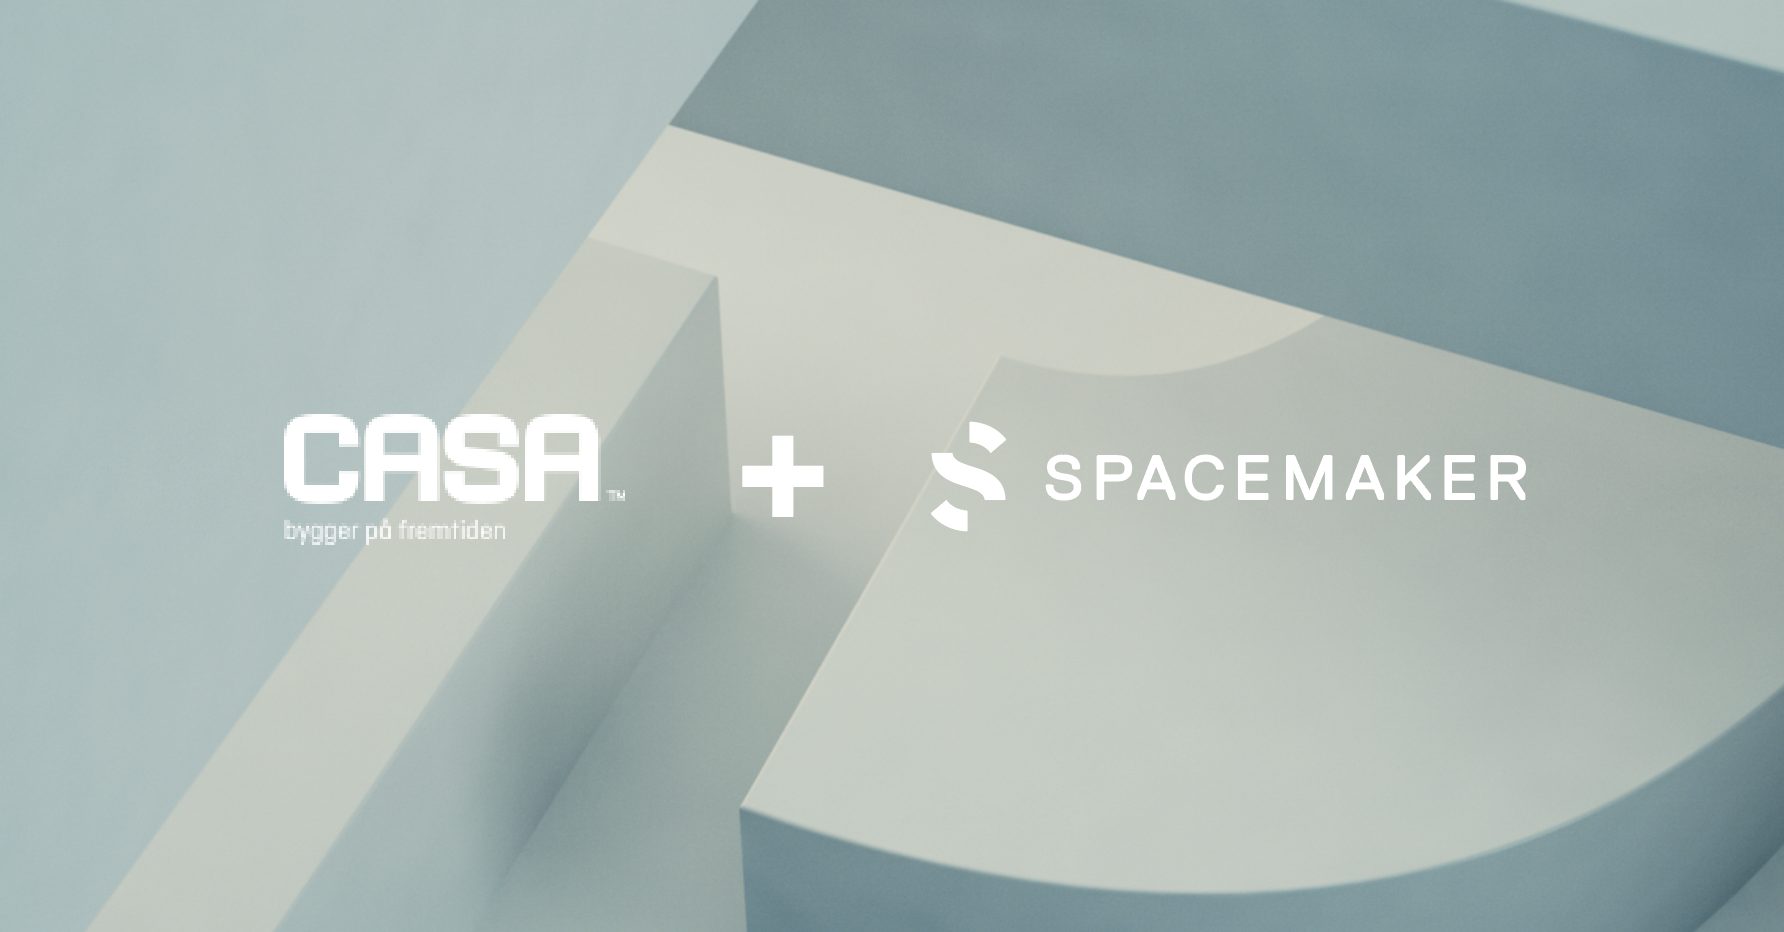 Spacemaker enters partnership with Danish contractor, CASA